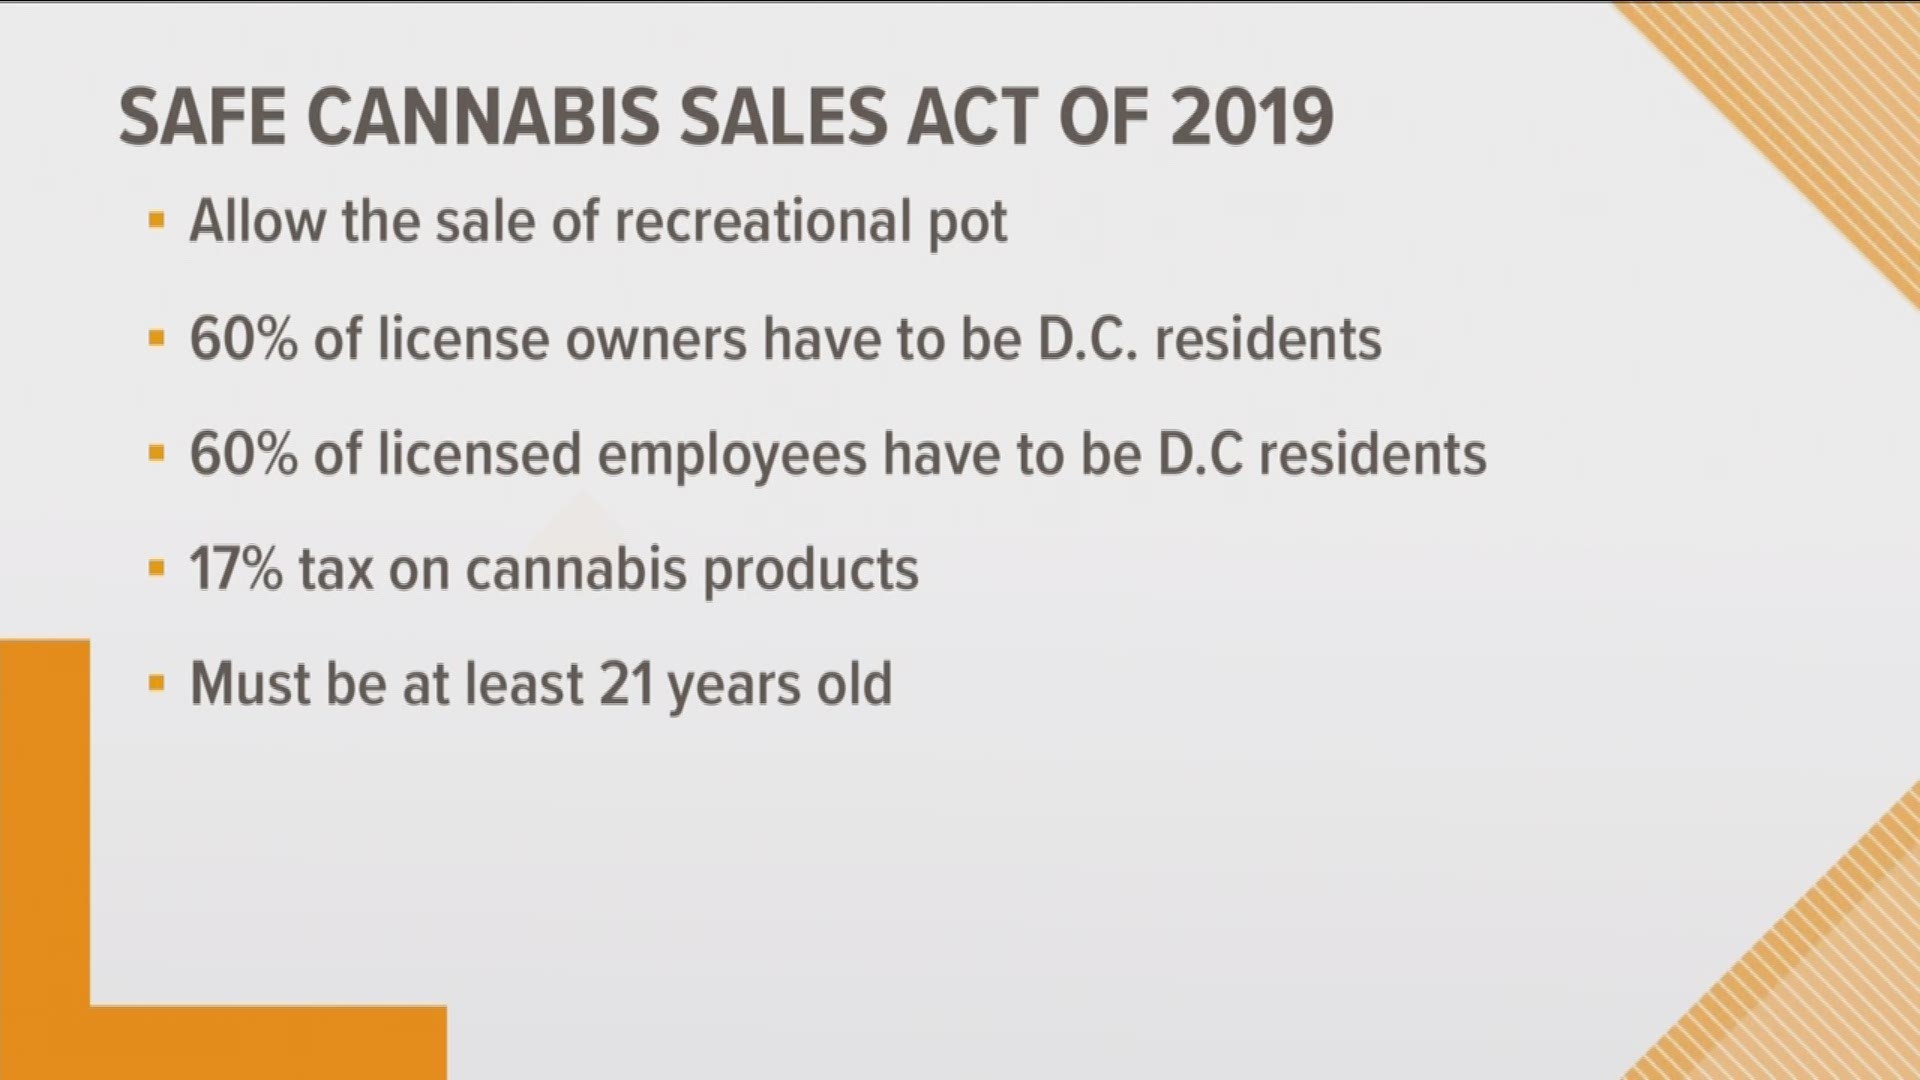 Mayor Bowser introduced the Safe Cannabis Sales Act Thursday afternoon, which outlines regulations for the sale and purchase of recreational marijuana